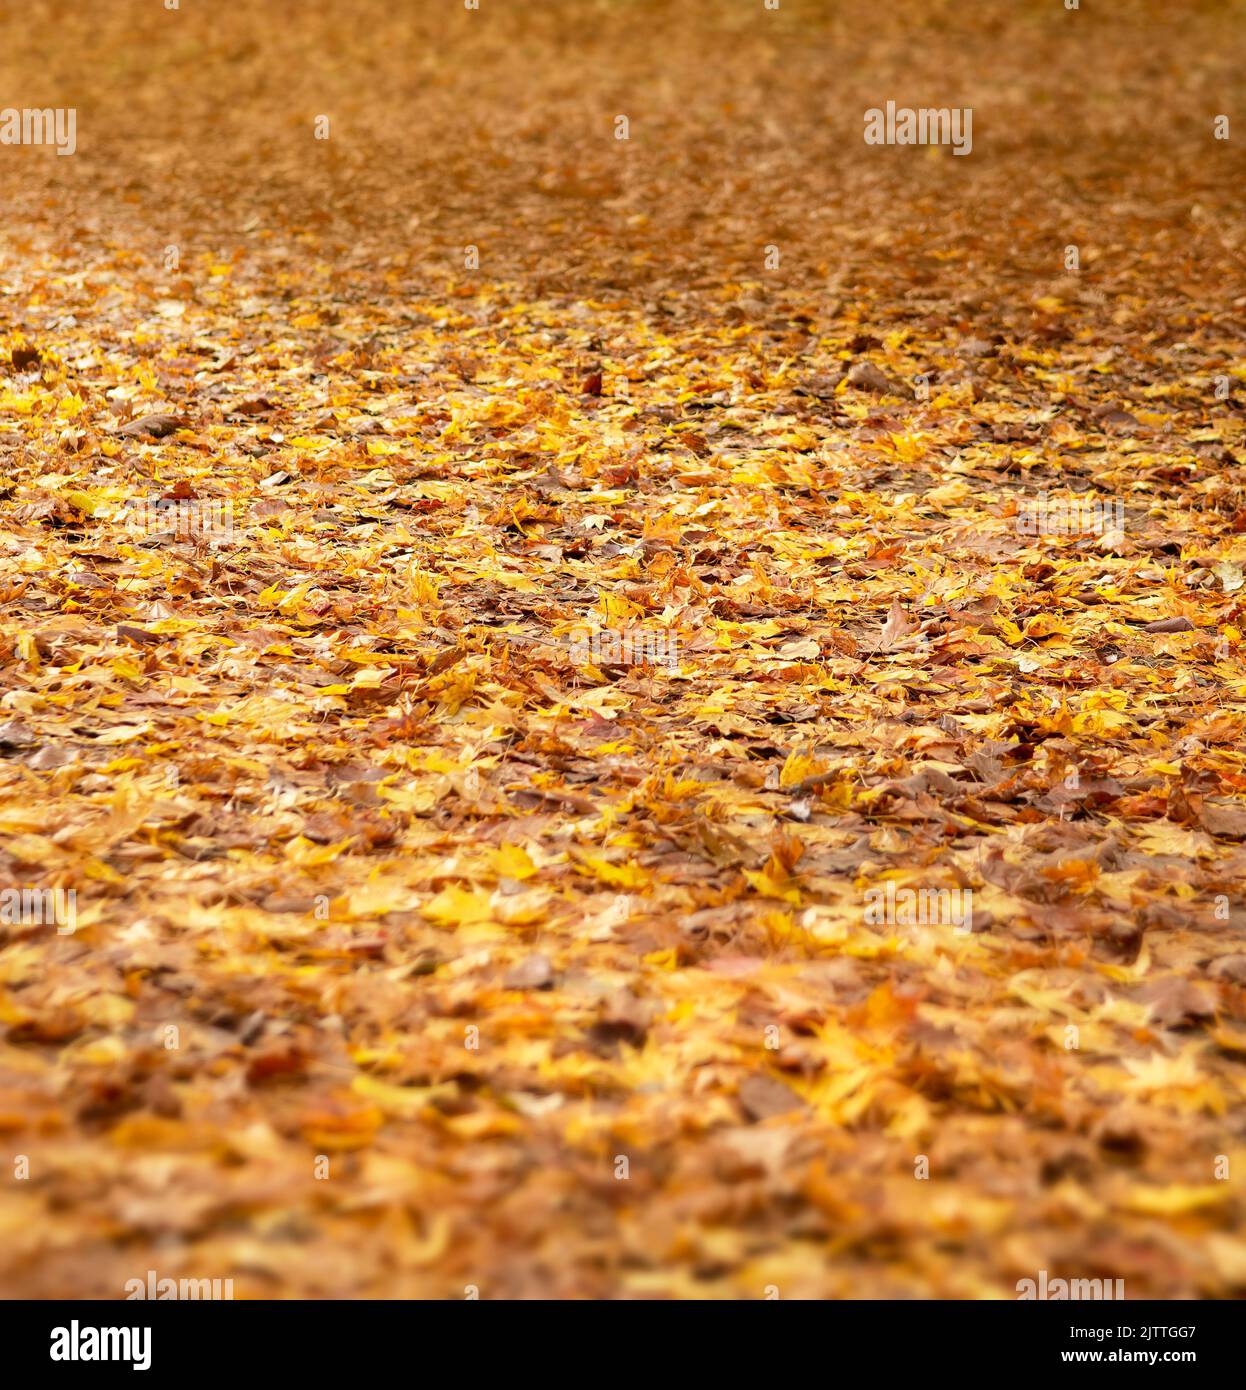 Full frame picture of Autumn leaves on ground with shallow depth of field Stock Photo